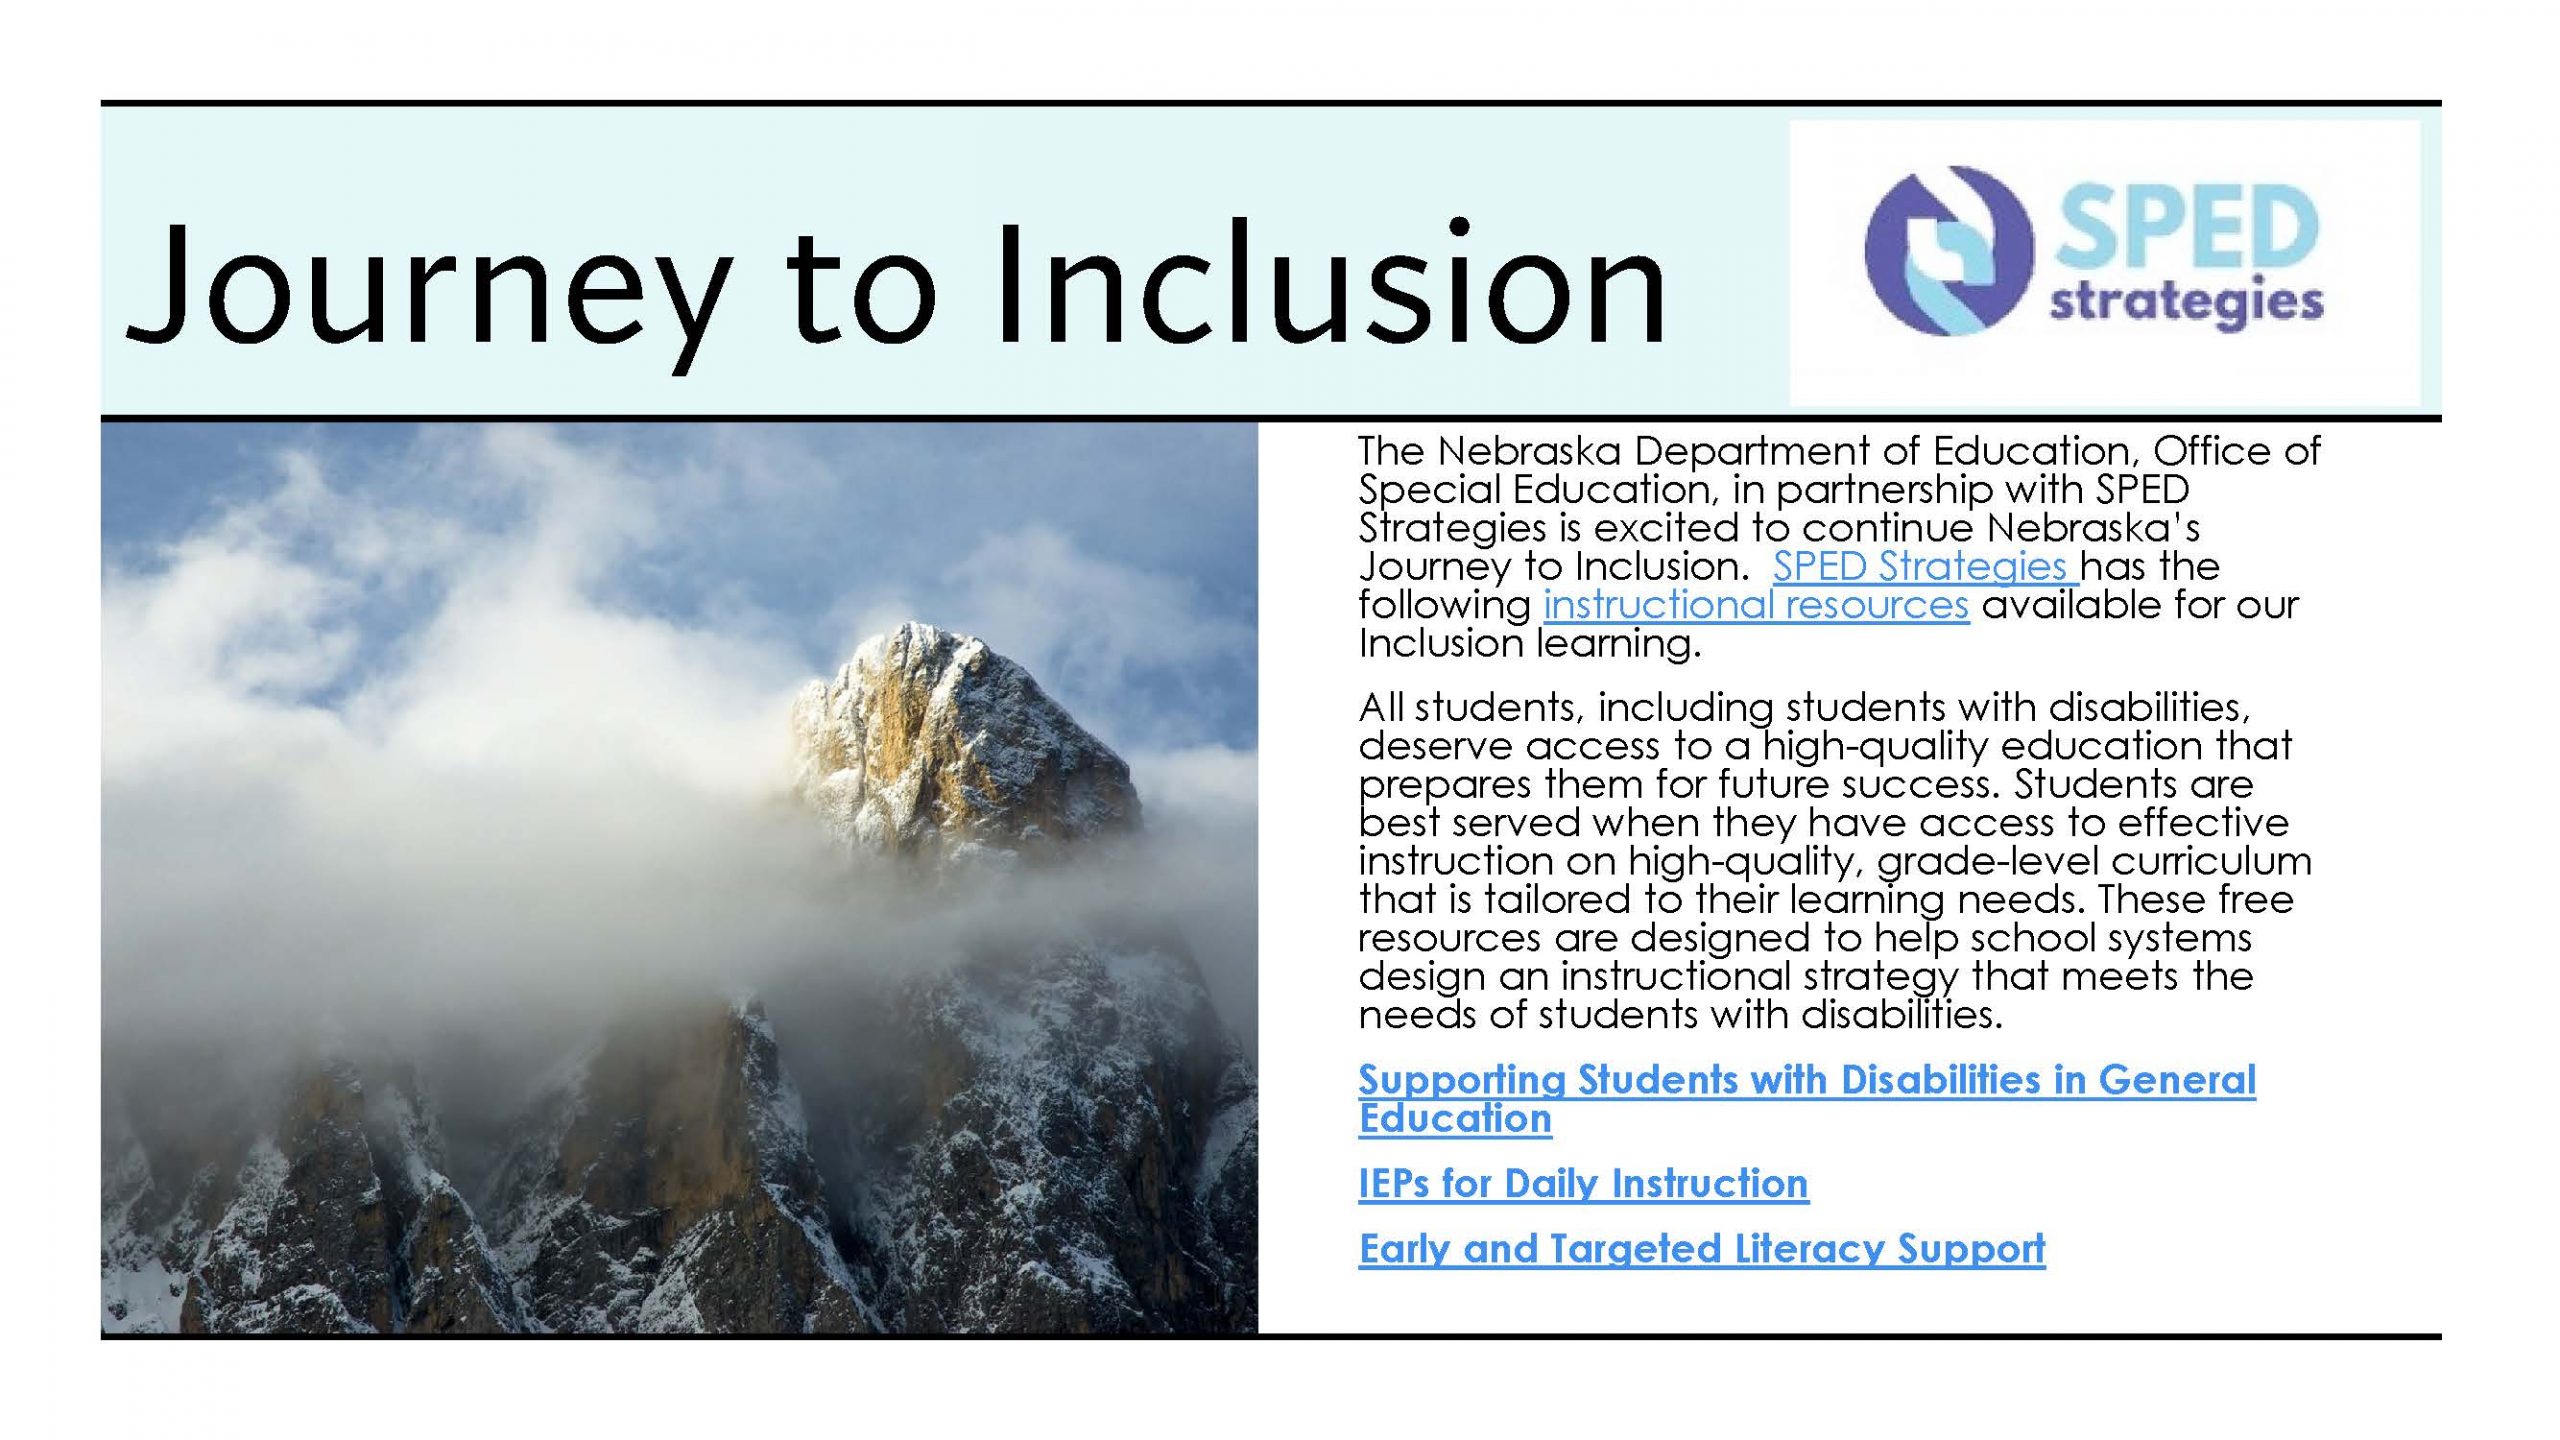 SPED Strategies has the following instructional resources available for our Inclusion learning